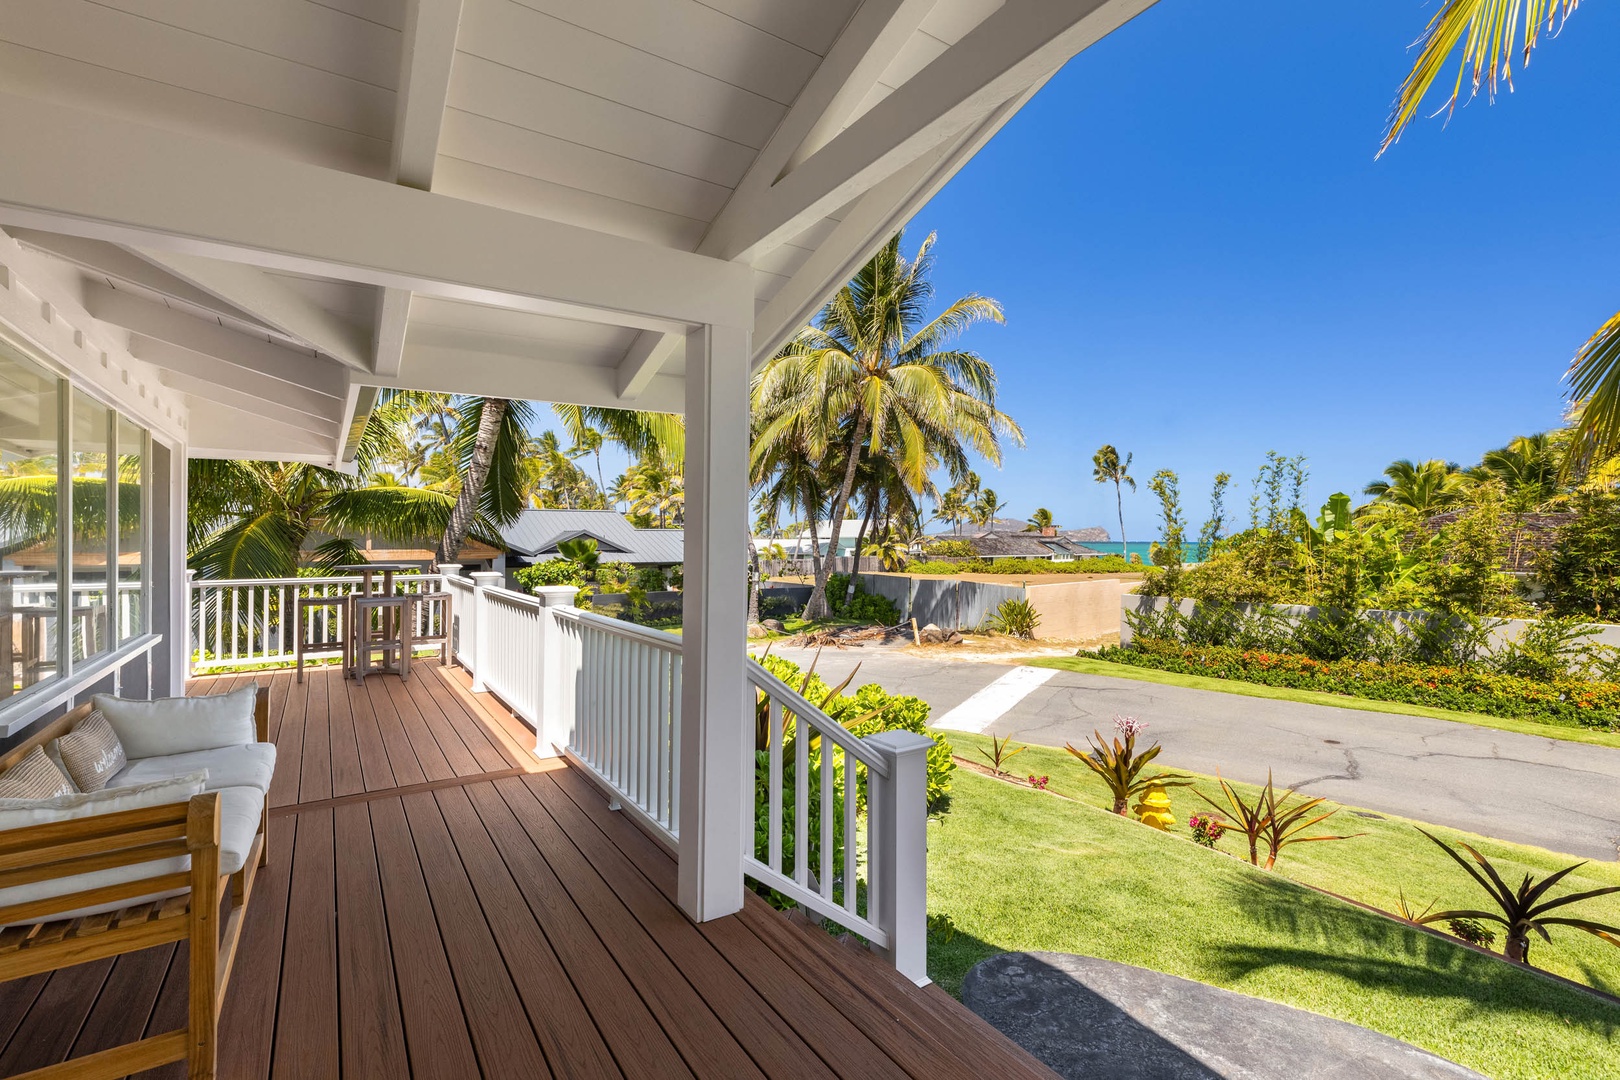 Kailua Vacation Rentals, Ranch Beach Estate - Welcome home!